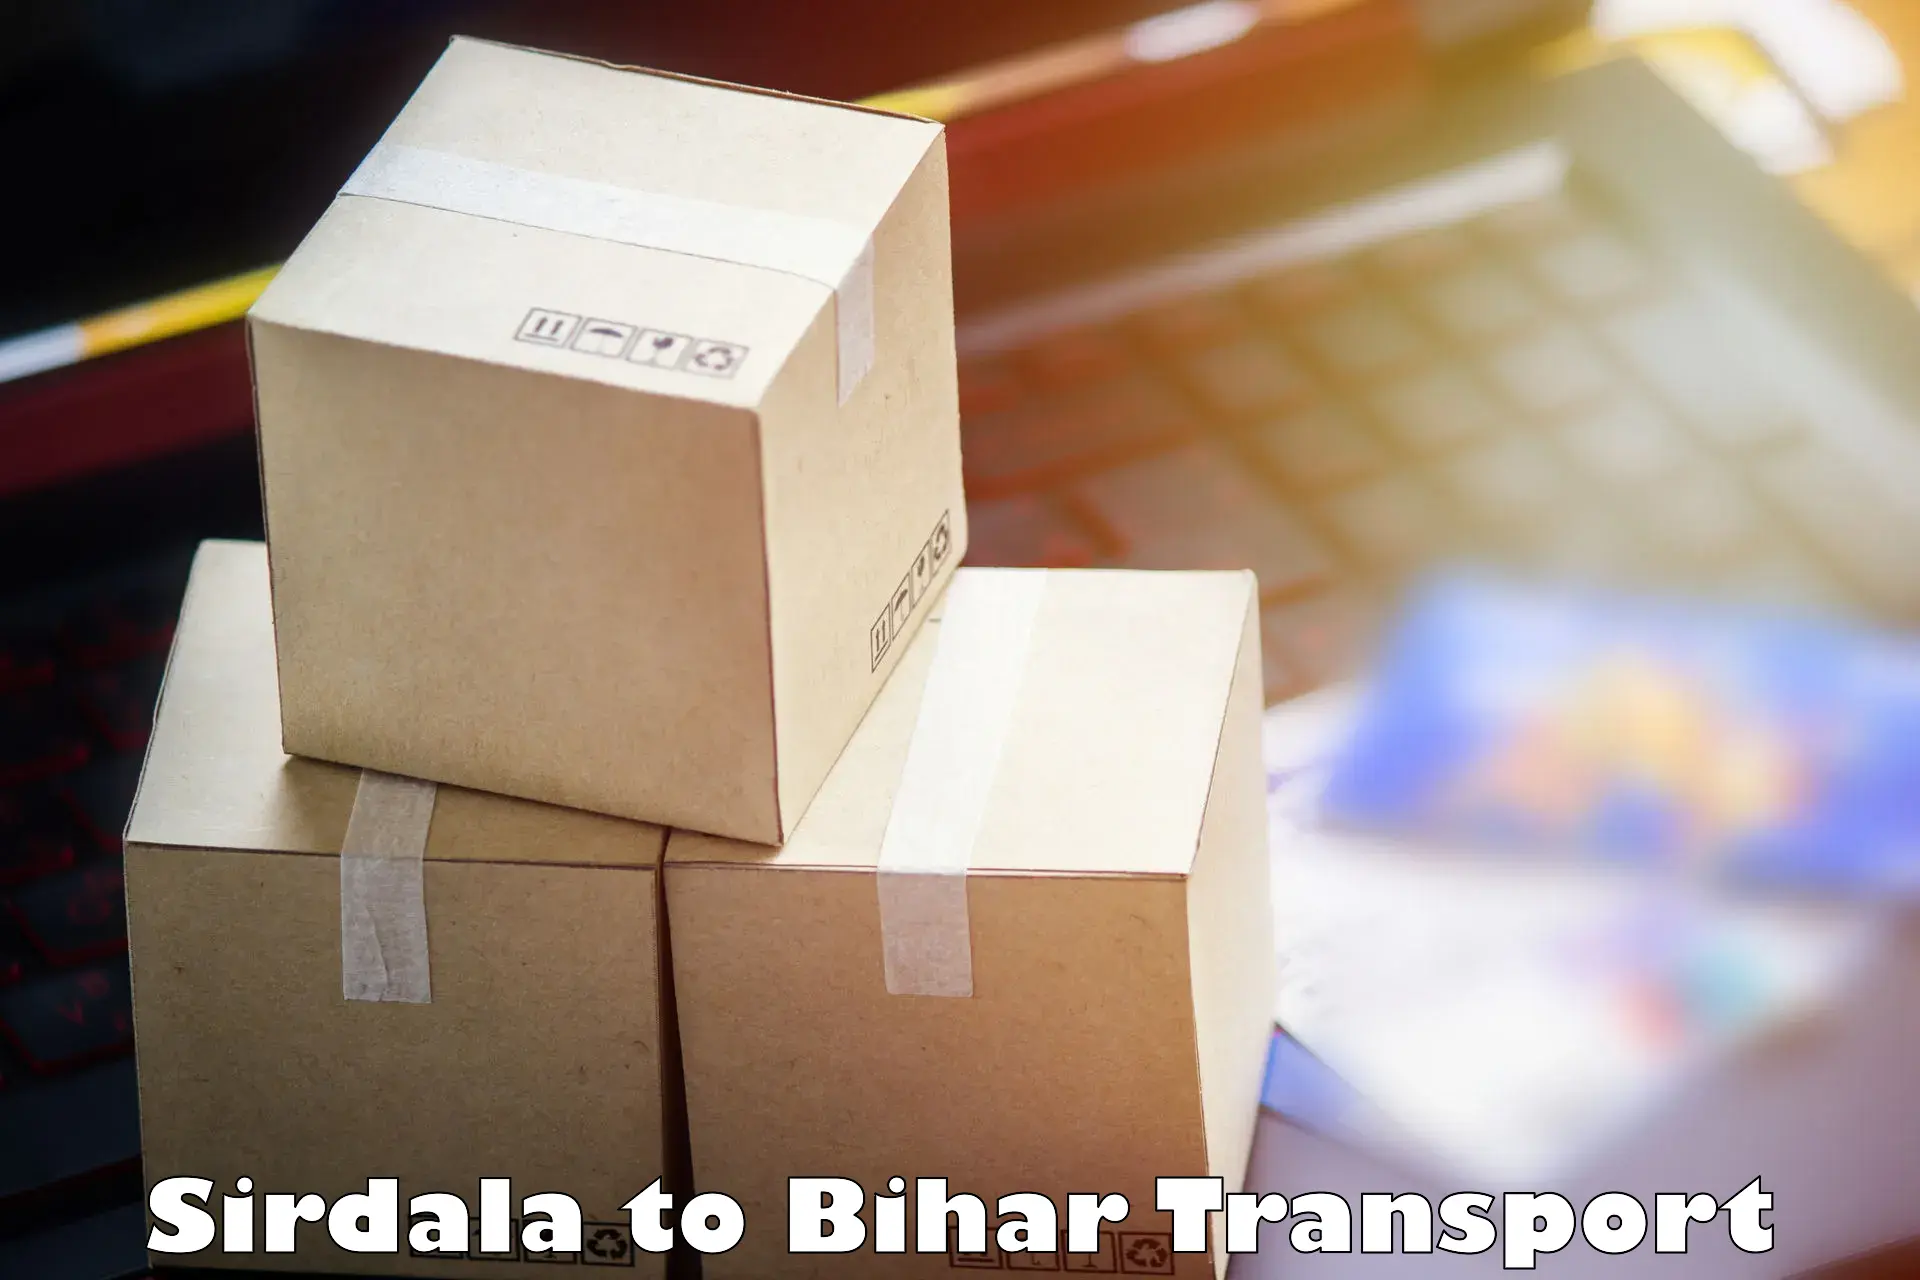 Daily transport service Sirdala to Singhia